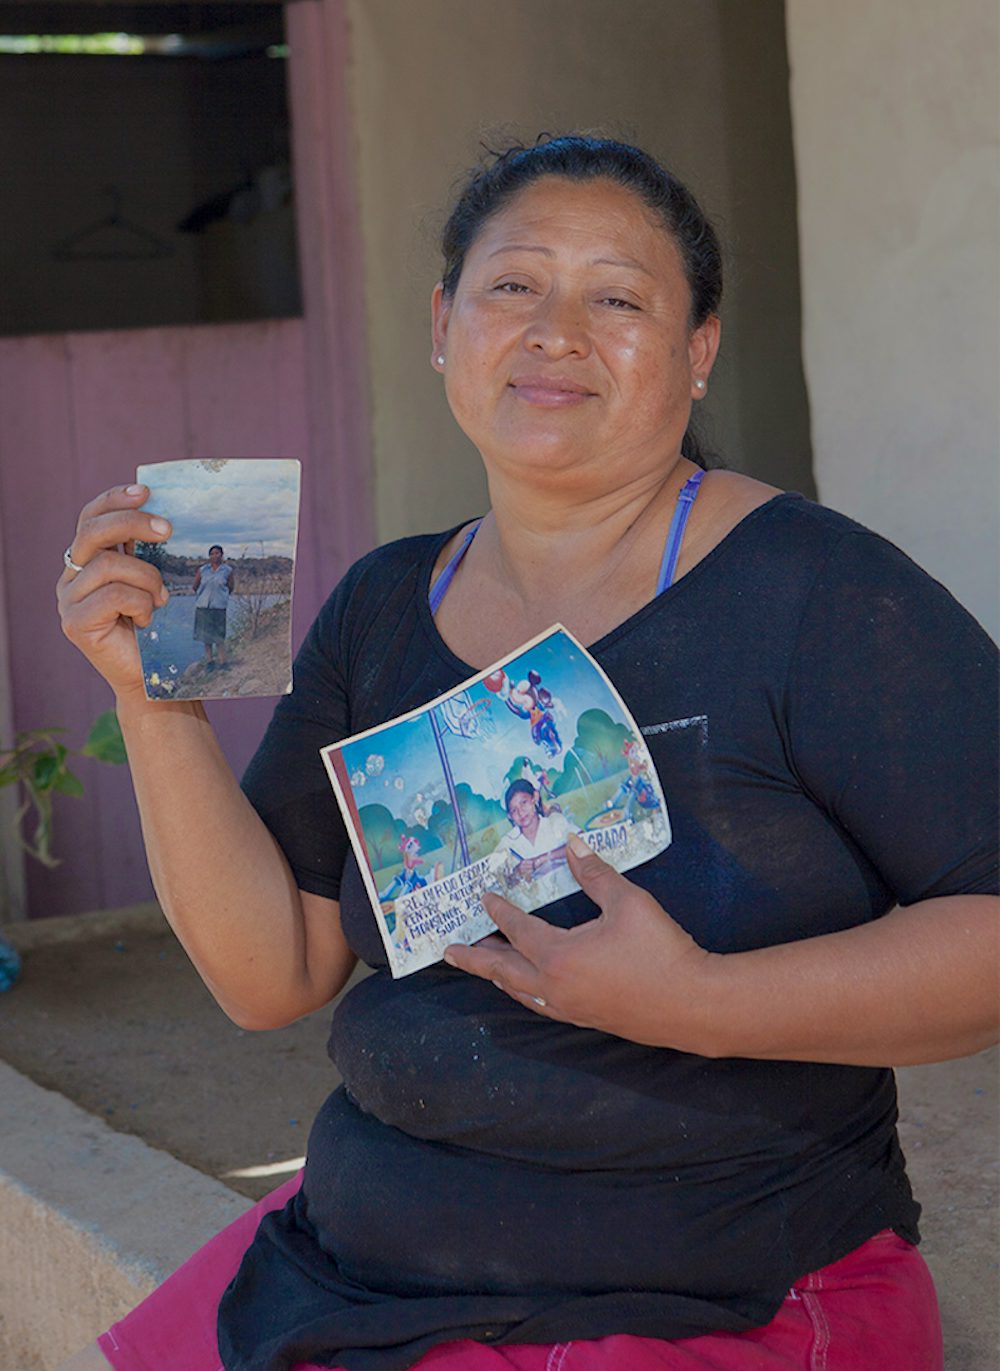 Santos holds up a picture of her mother.